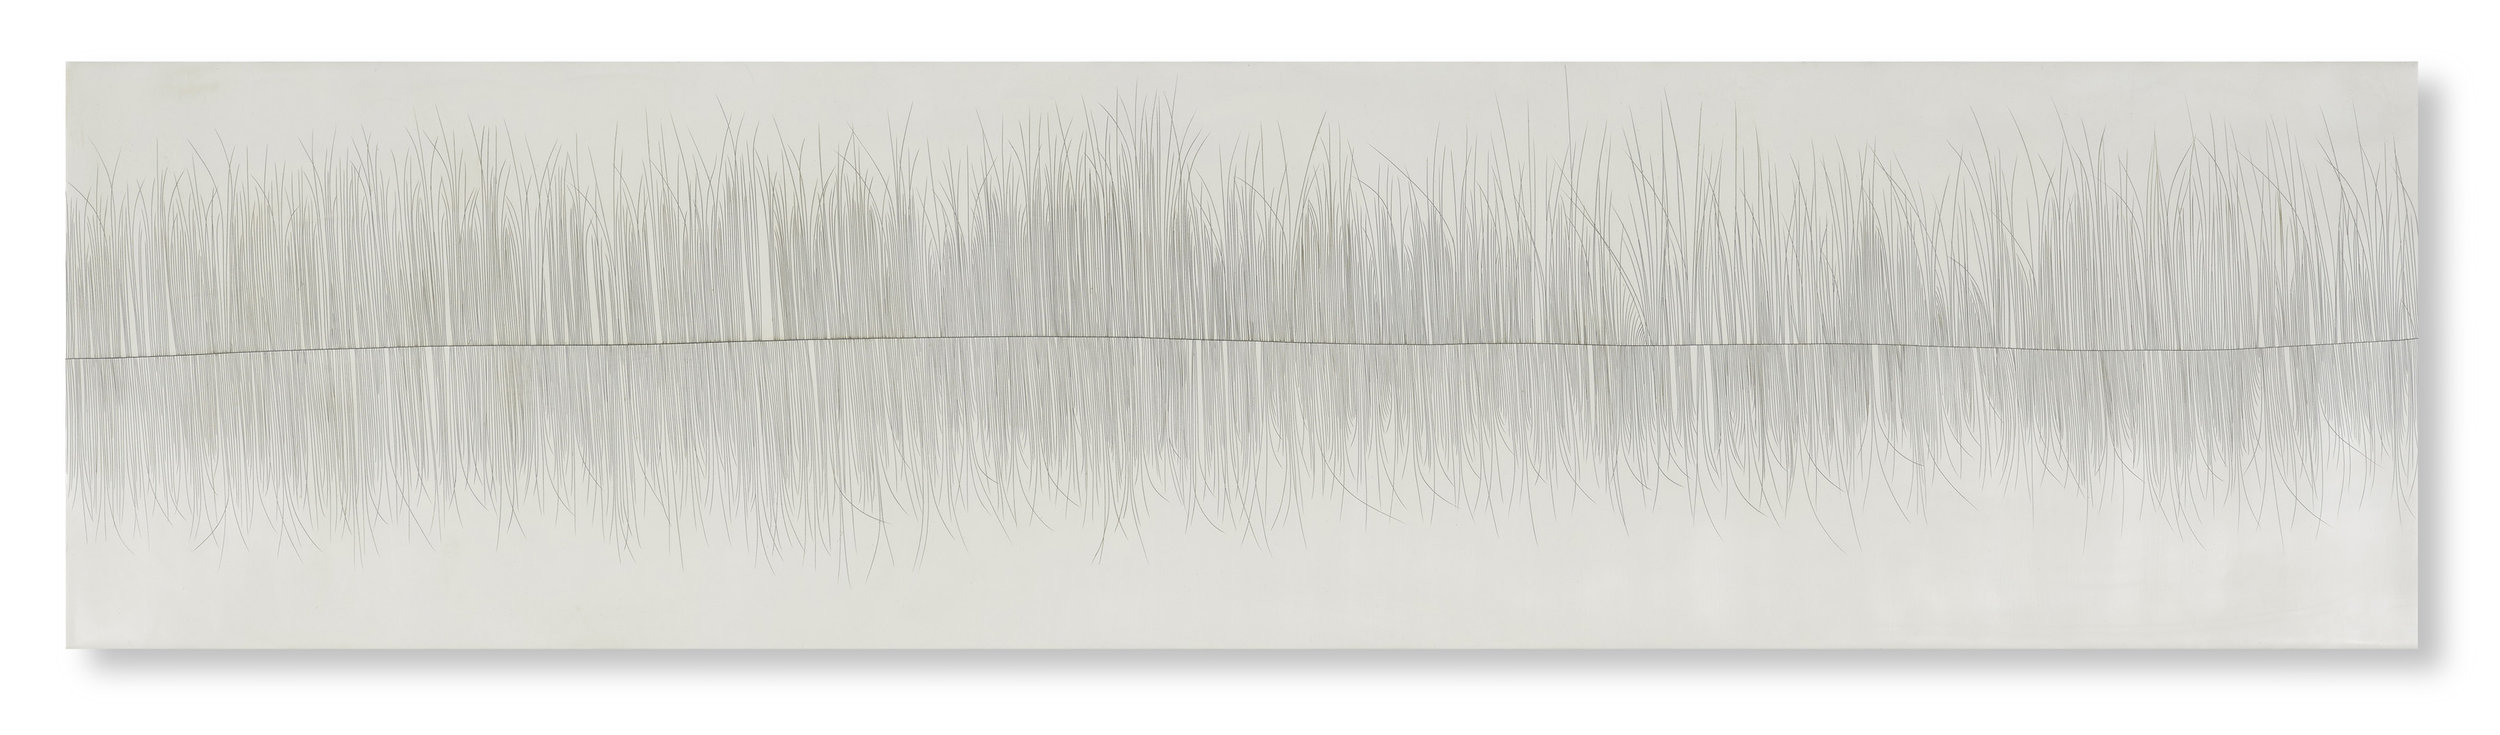  Threadline 11, 2017 (sold) print available Encaustic, Oil 12 x 48 x .75 inches (can hang vertically or horizontally)  The Threadline Series is inspired by visual observations made in my studio environment, in nature and on neighborhood walks: left-o